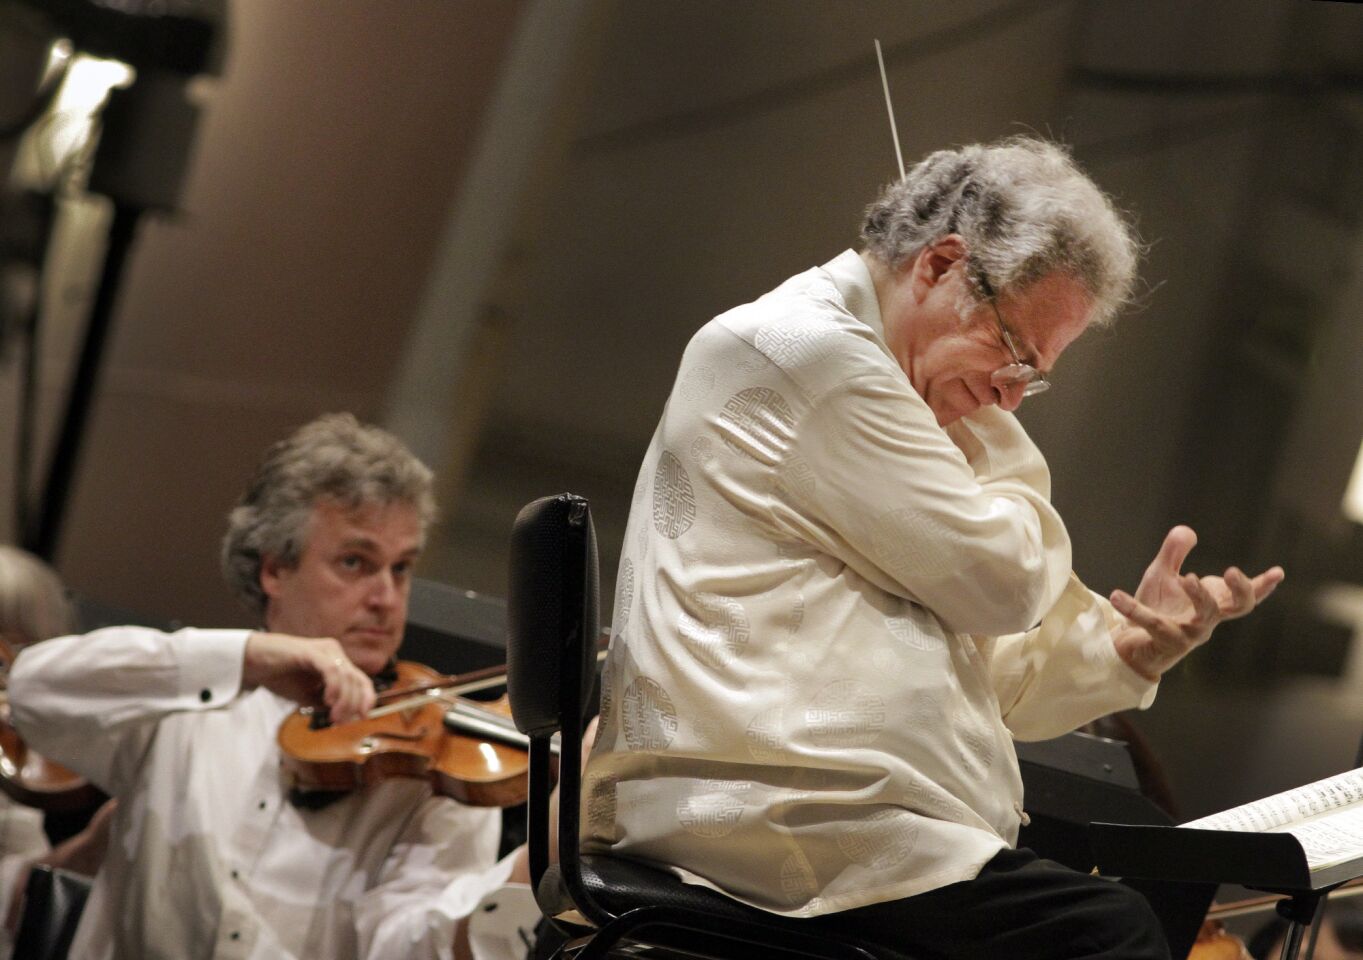 Itzhak Perlman conducts the L.A. Phil and plays the violin in an all Beethoven program at the Hollywood Bowl on Sept. 06, 2011. Review: Itzhak Perlman closes Hollywood Bowl classical season